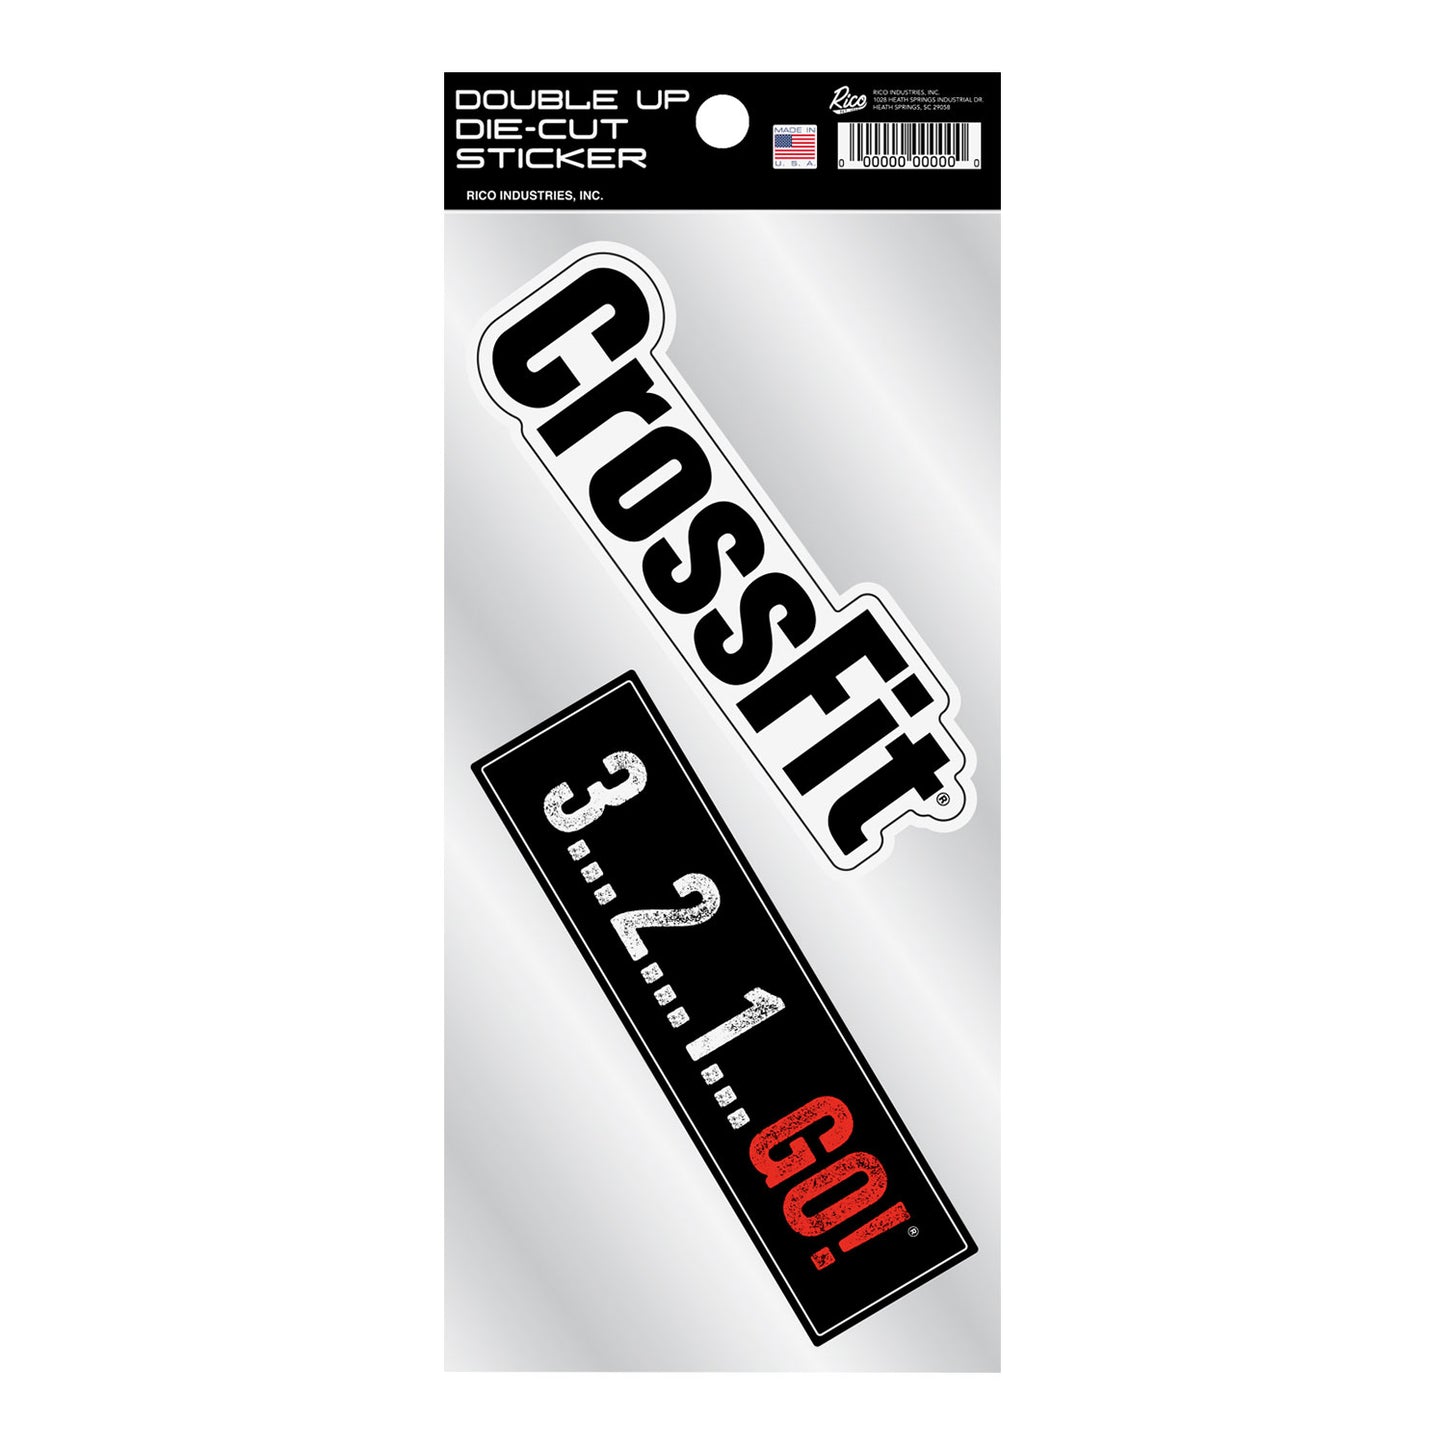 CrossFit Double Up Sticker Sheet in black, white, and red - front view